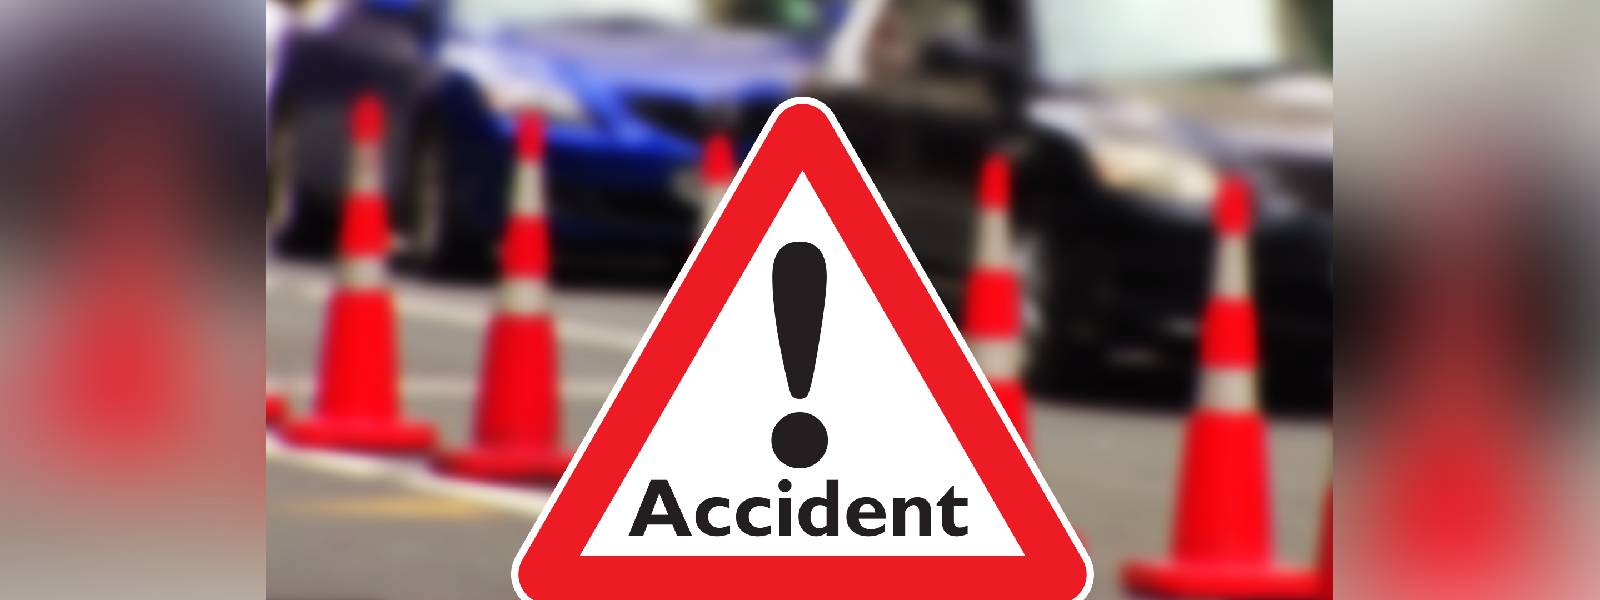 Road accidents claim 12 lives within 24 hours